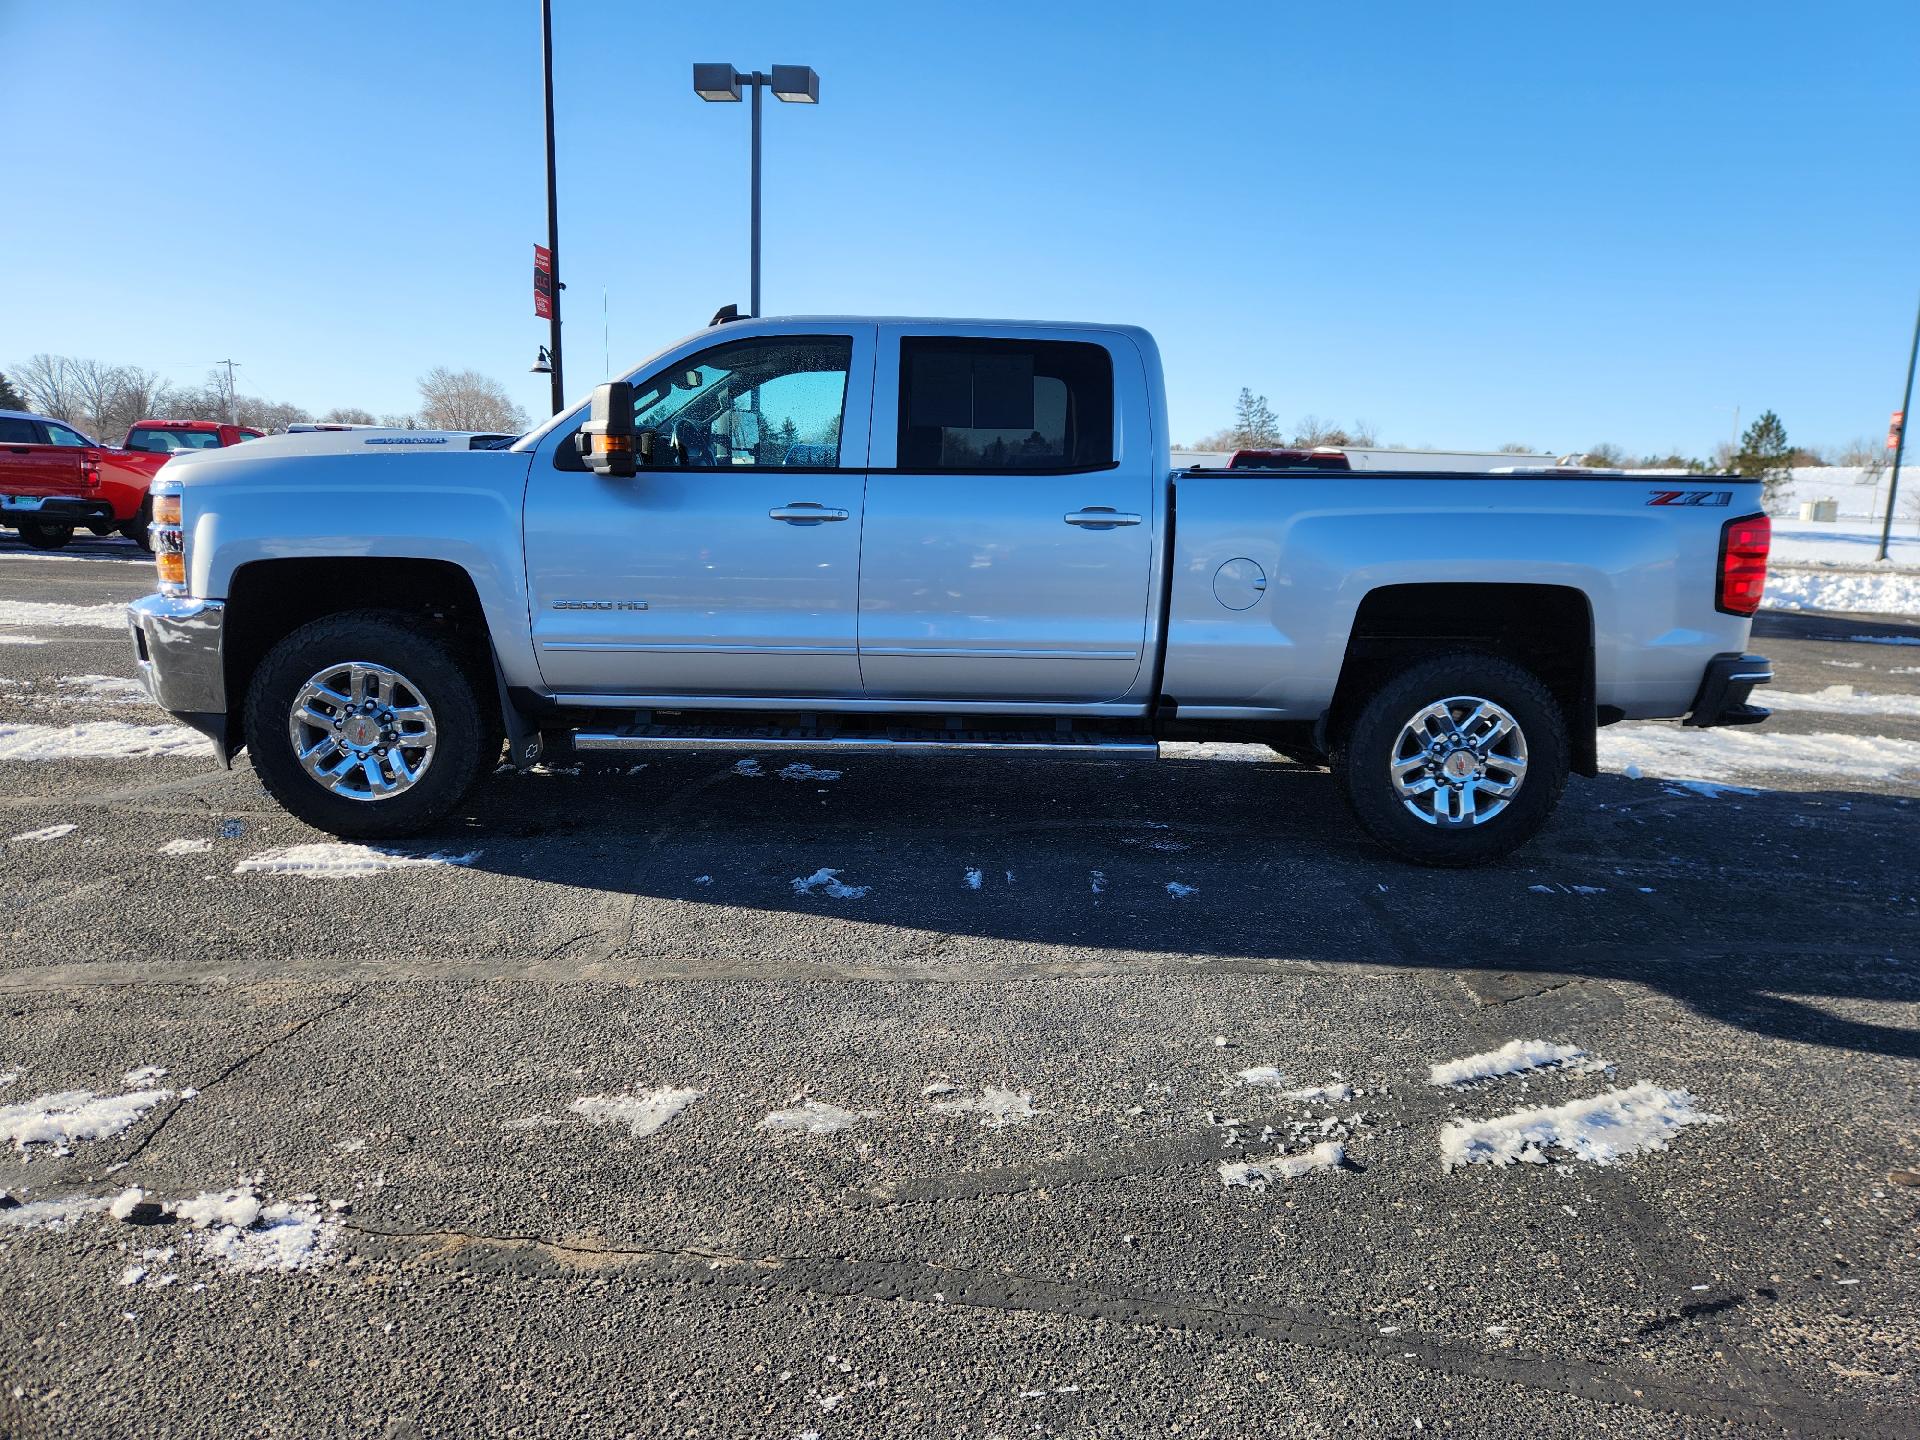 Used 2019 Chevrolet Silverado 3500HD LT with VIN 1GC4KWEY5KF152286 for sale in Staples, Minnesota